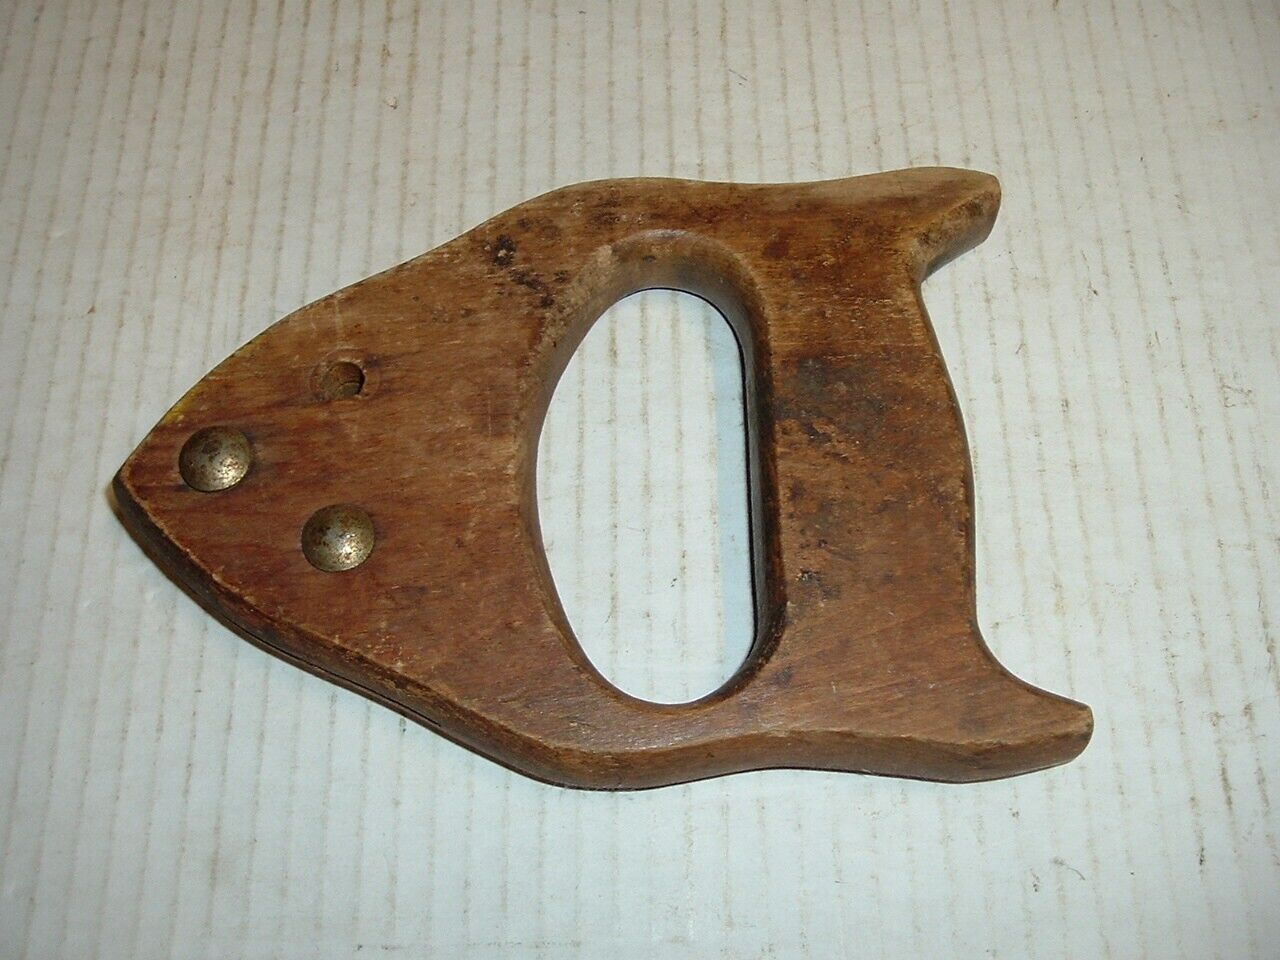 Hand Saw Handle Vintage Wooden Woodworking Tool